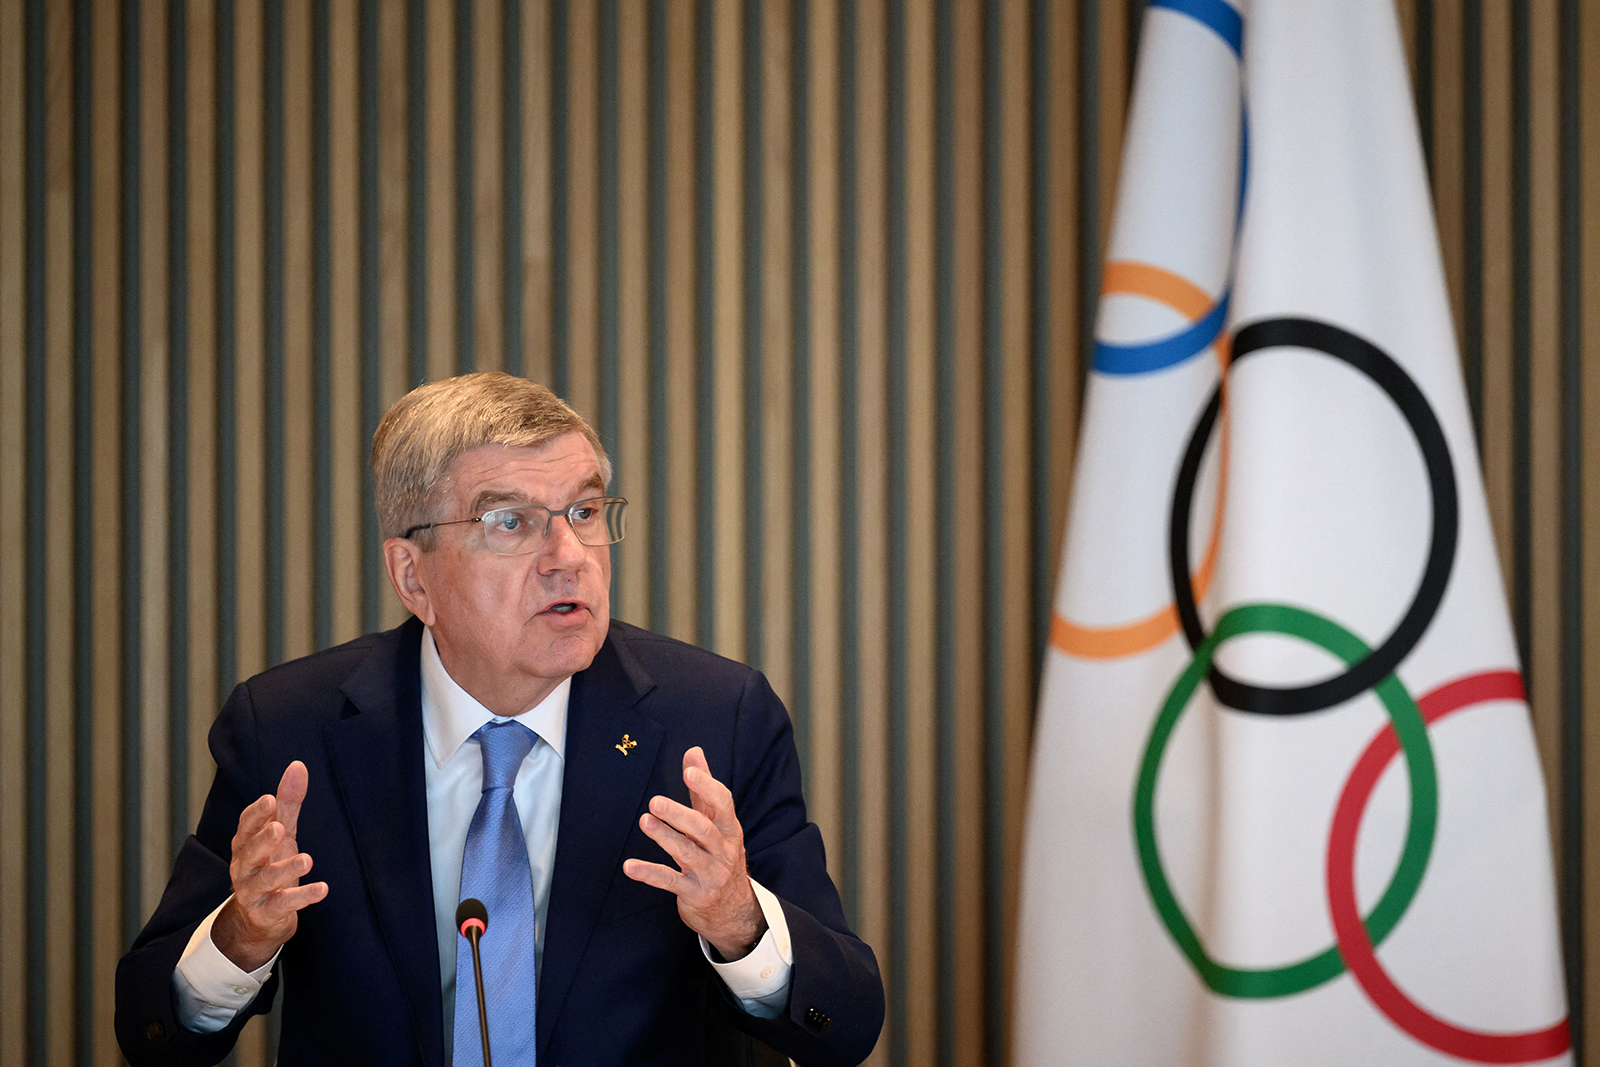 Thomas Bach speaks during an IOC executive board meeting in Lausanne, Switzerland, on March 28.